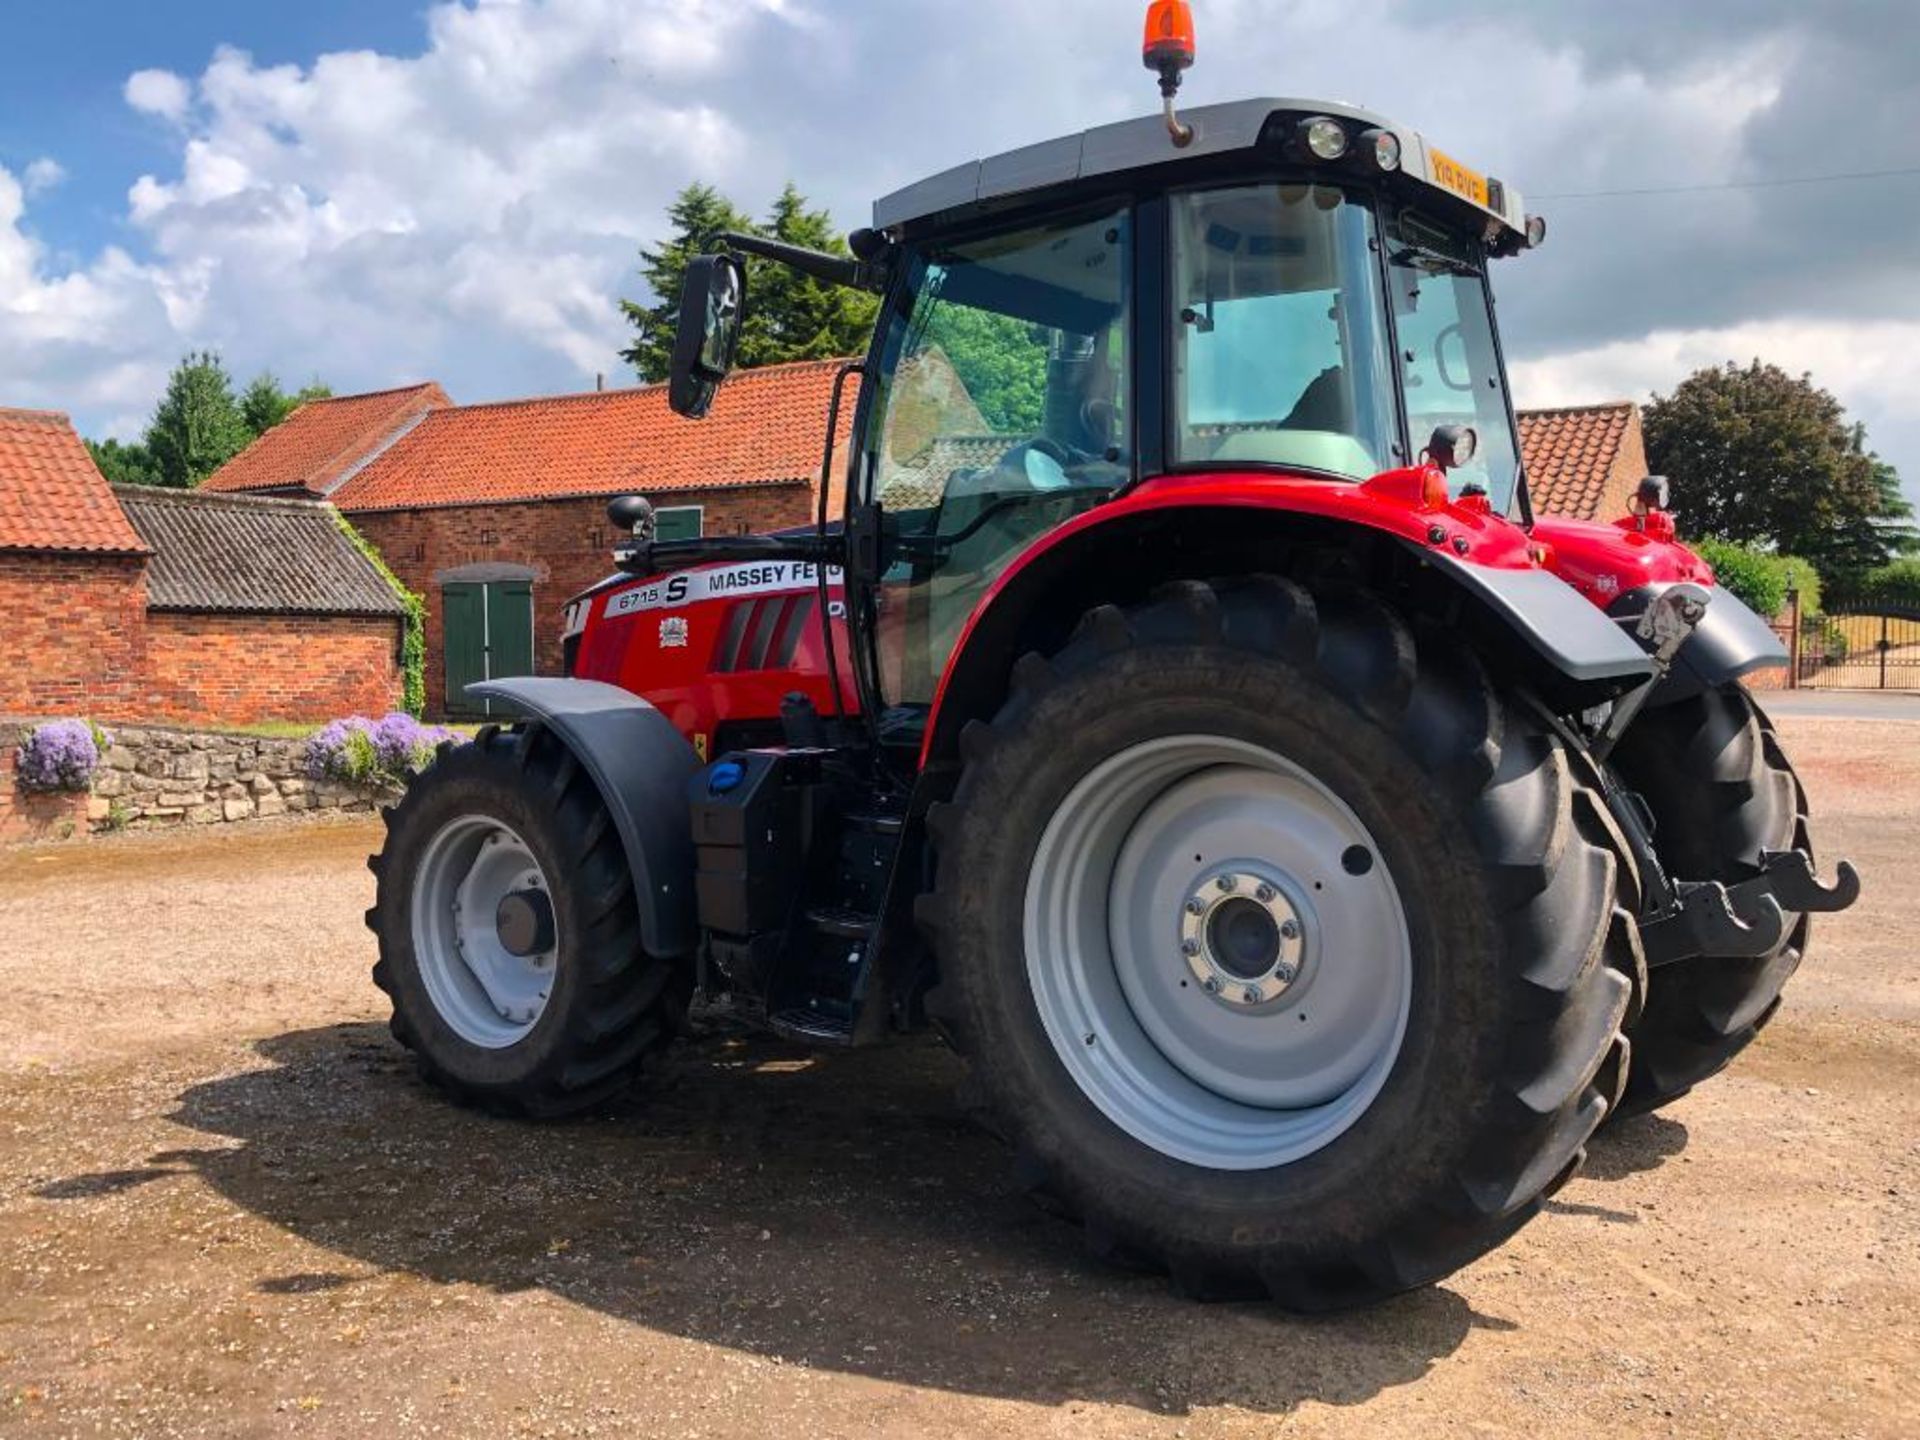 2019 Massey Ferguson 6715 S Dyna 6 50kph 4wd tractor c/w 3 manual spools, front linkage, air brakes, - Image 8 of 41